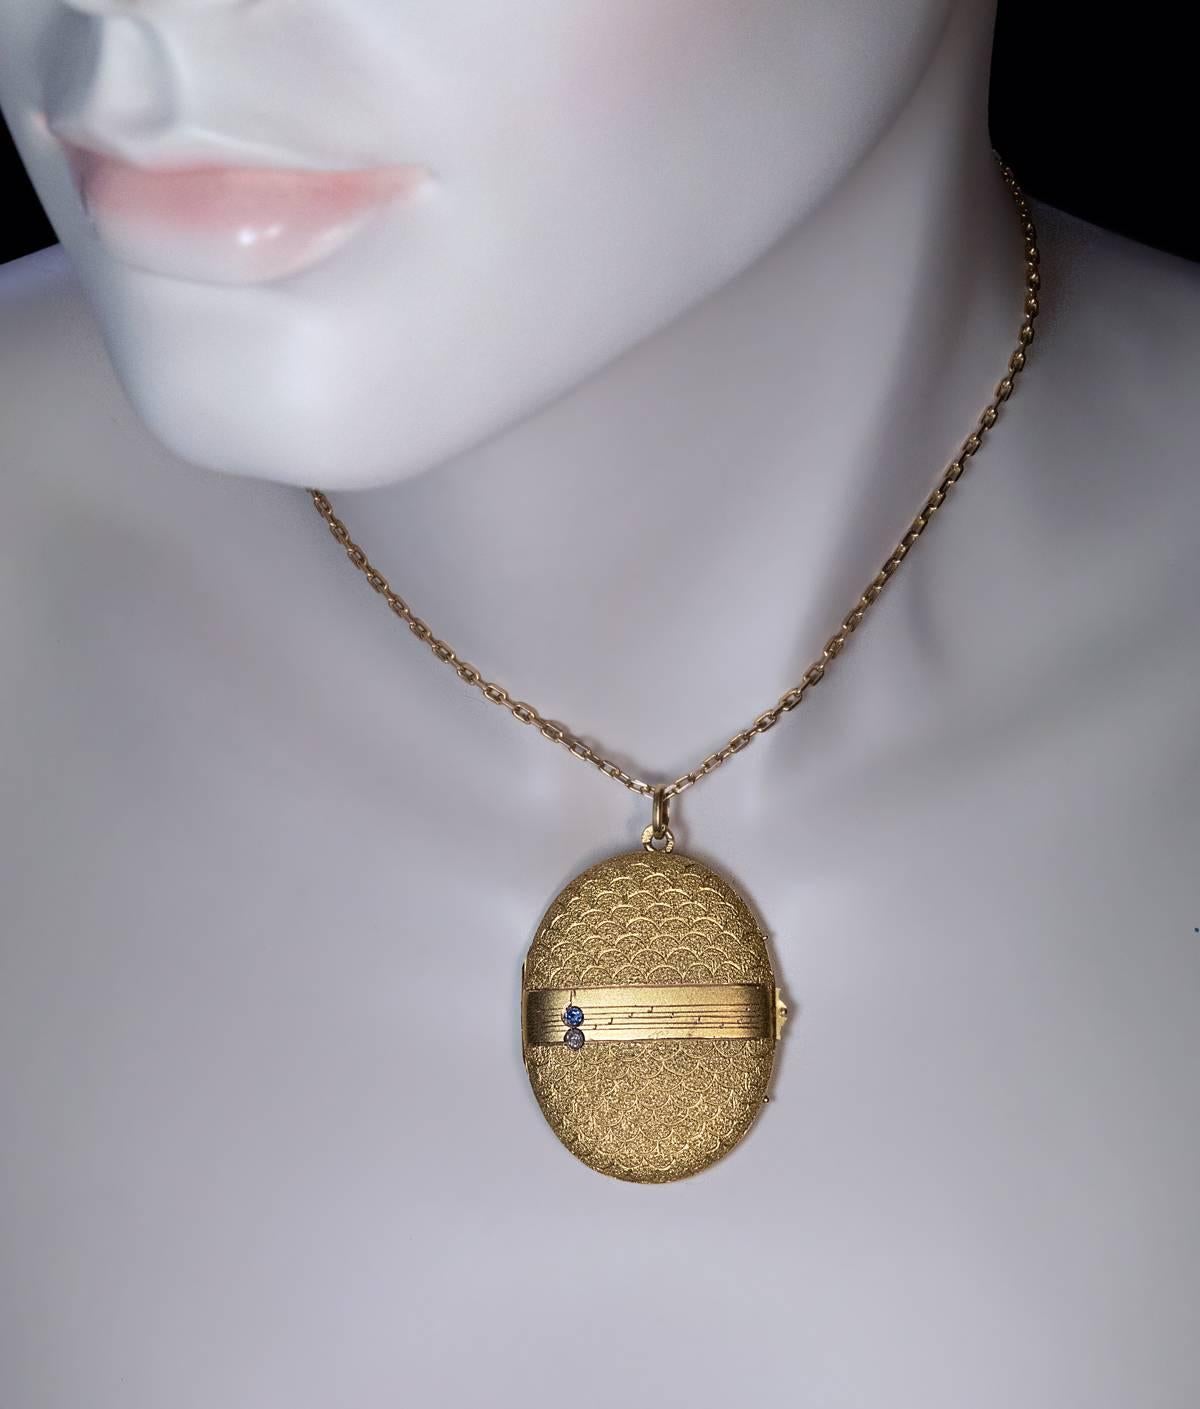 Russian, made in Odessa between 1908 and 1917

The front cover of this unusual locket is engine turned in a fish scale pattern with a matte gold band across the center.

The band is hand engraved with musical notes and embellished with a diamond